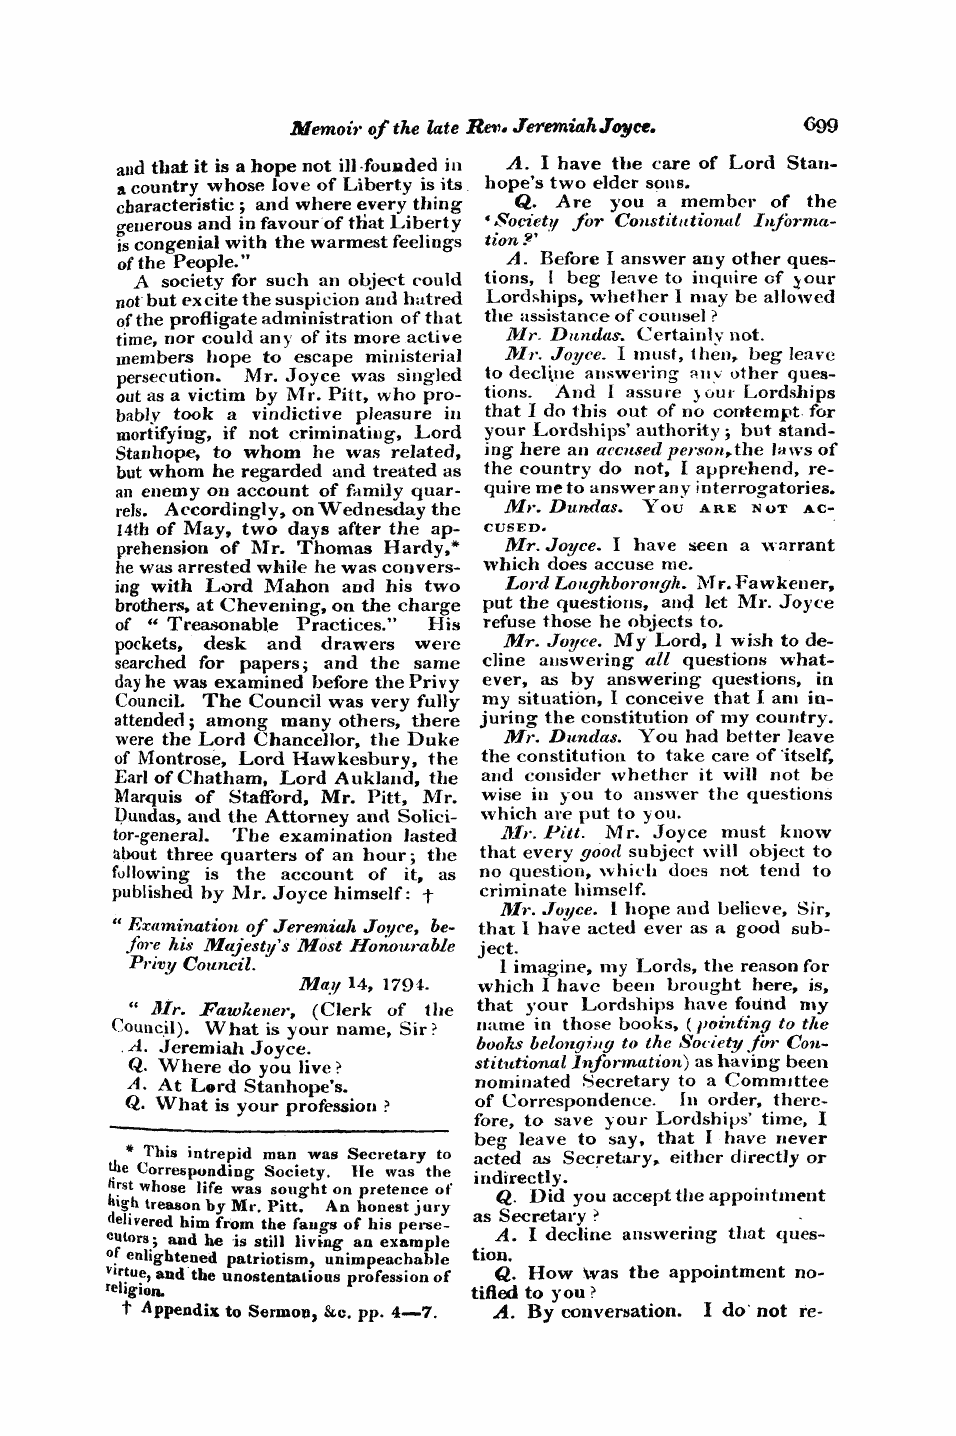 Monthly Repository (1806-1838) and Unitarian Chronicle (1832-1833): F Y, 1st edition: 3